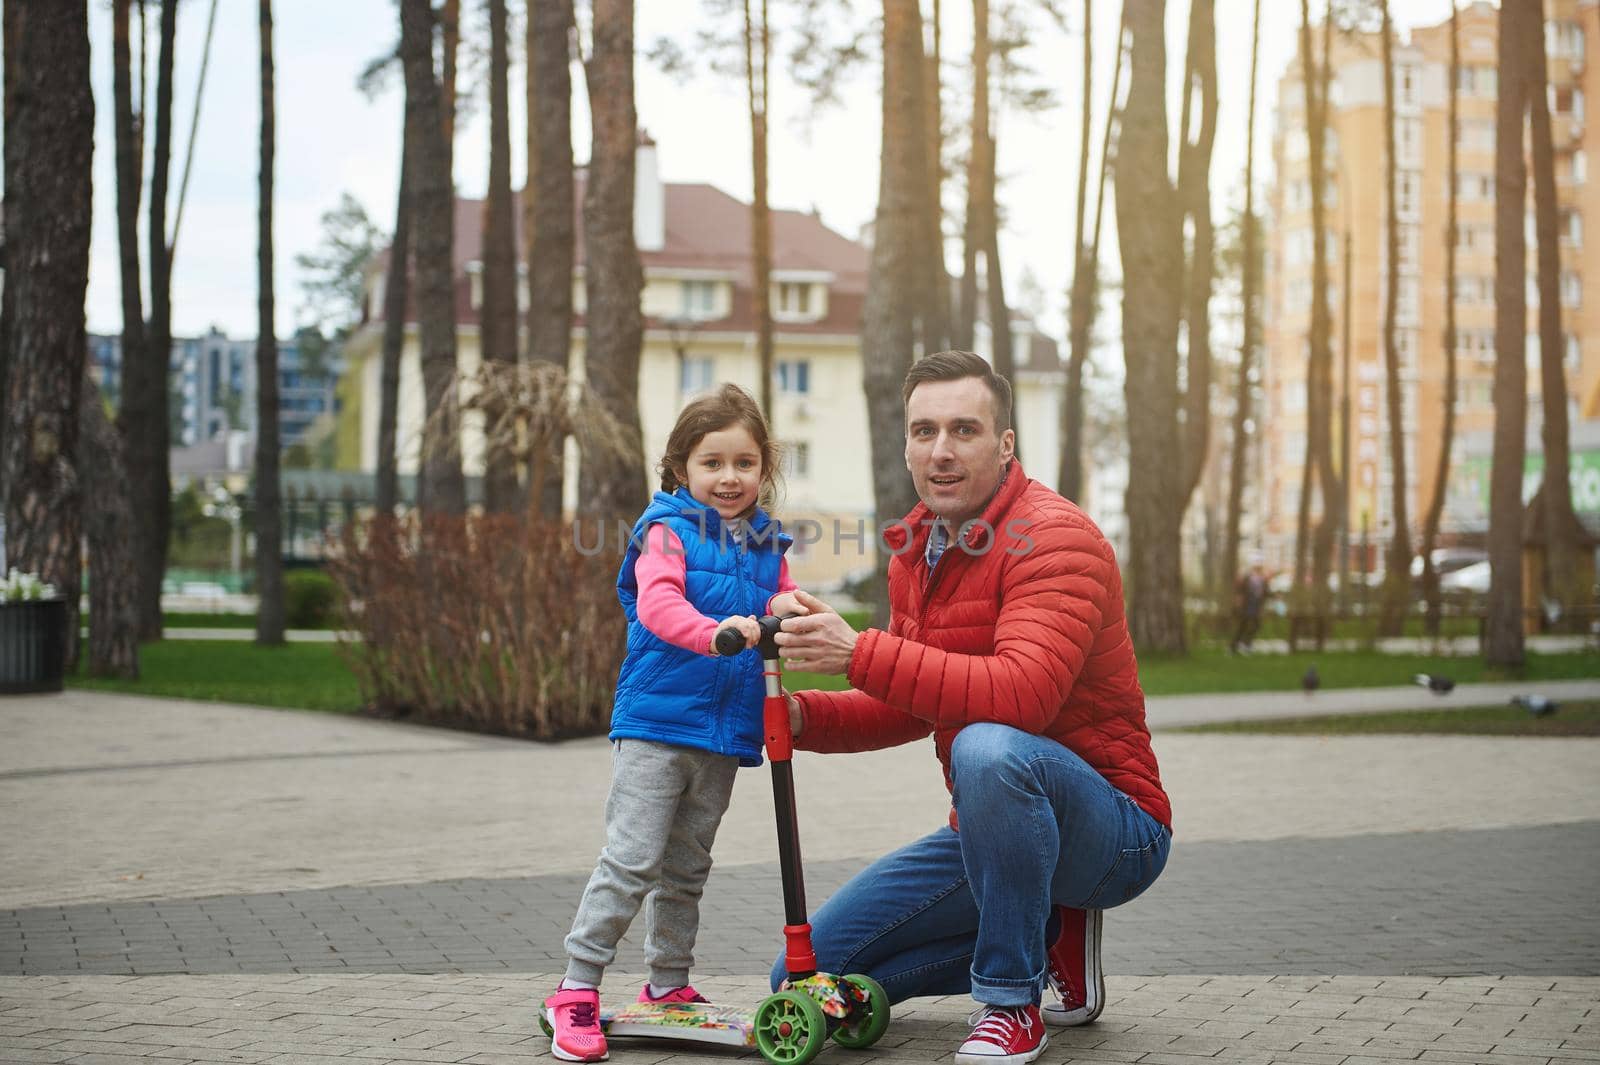 Handsome middle aged European man, happy caring father and his beloved daughter on a kick scooter, spending time together in an urban park by artgf